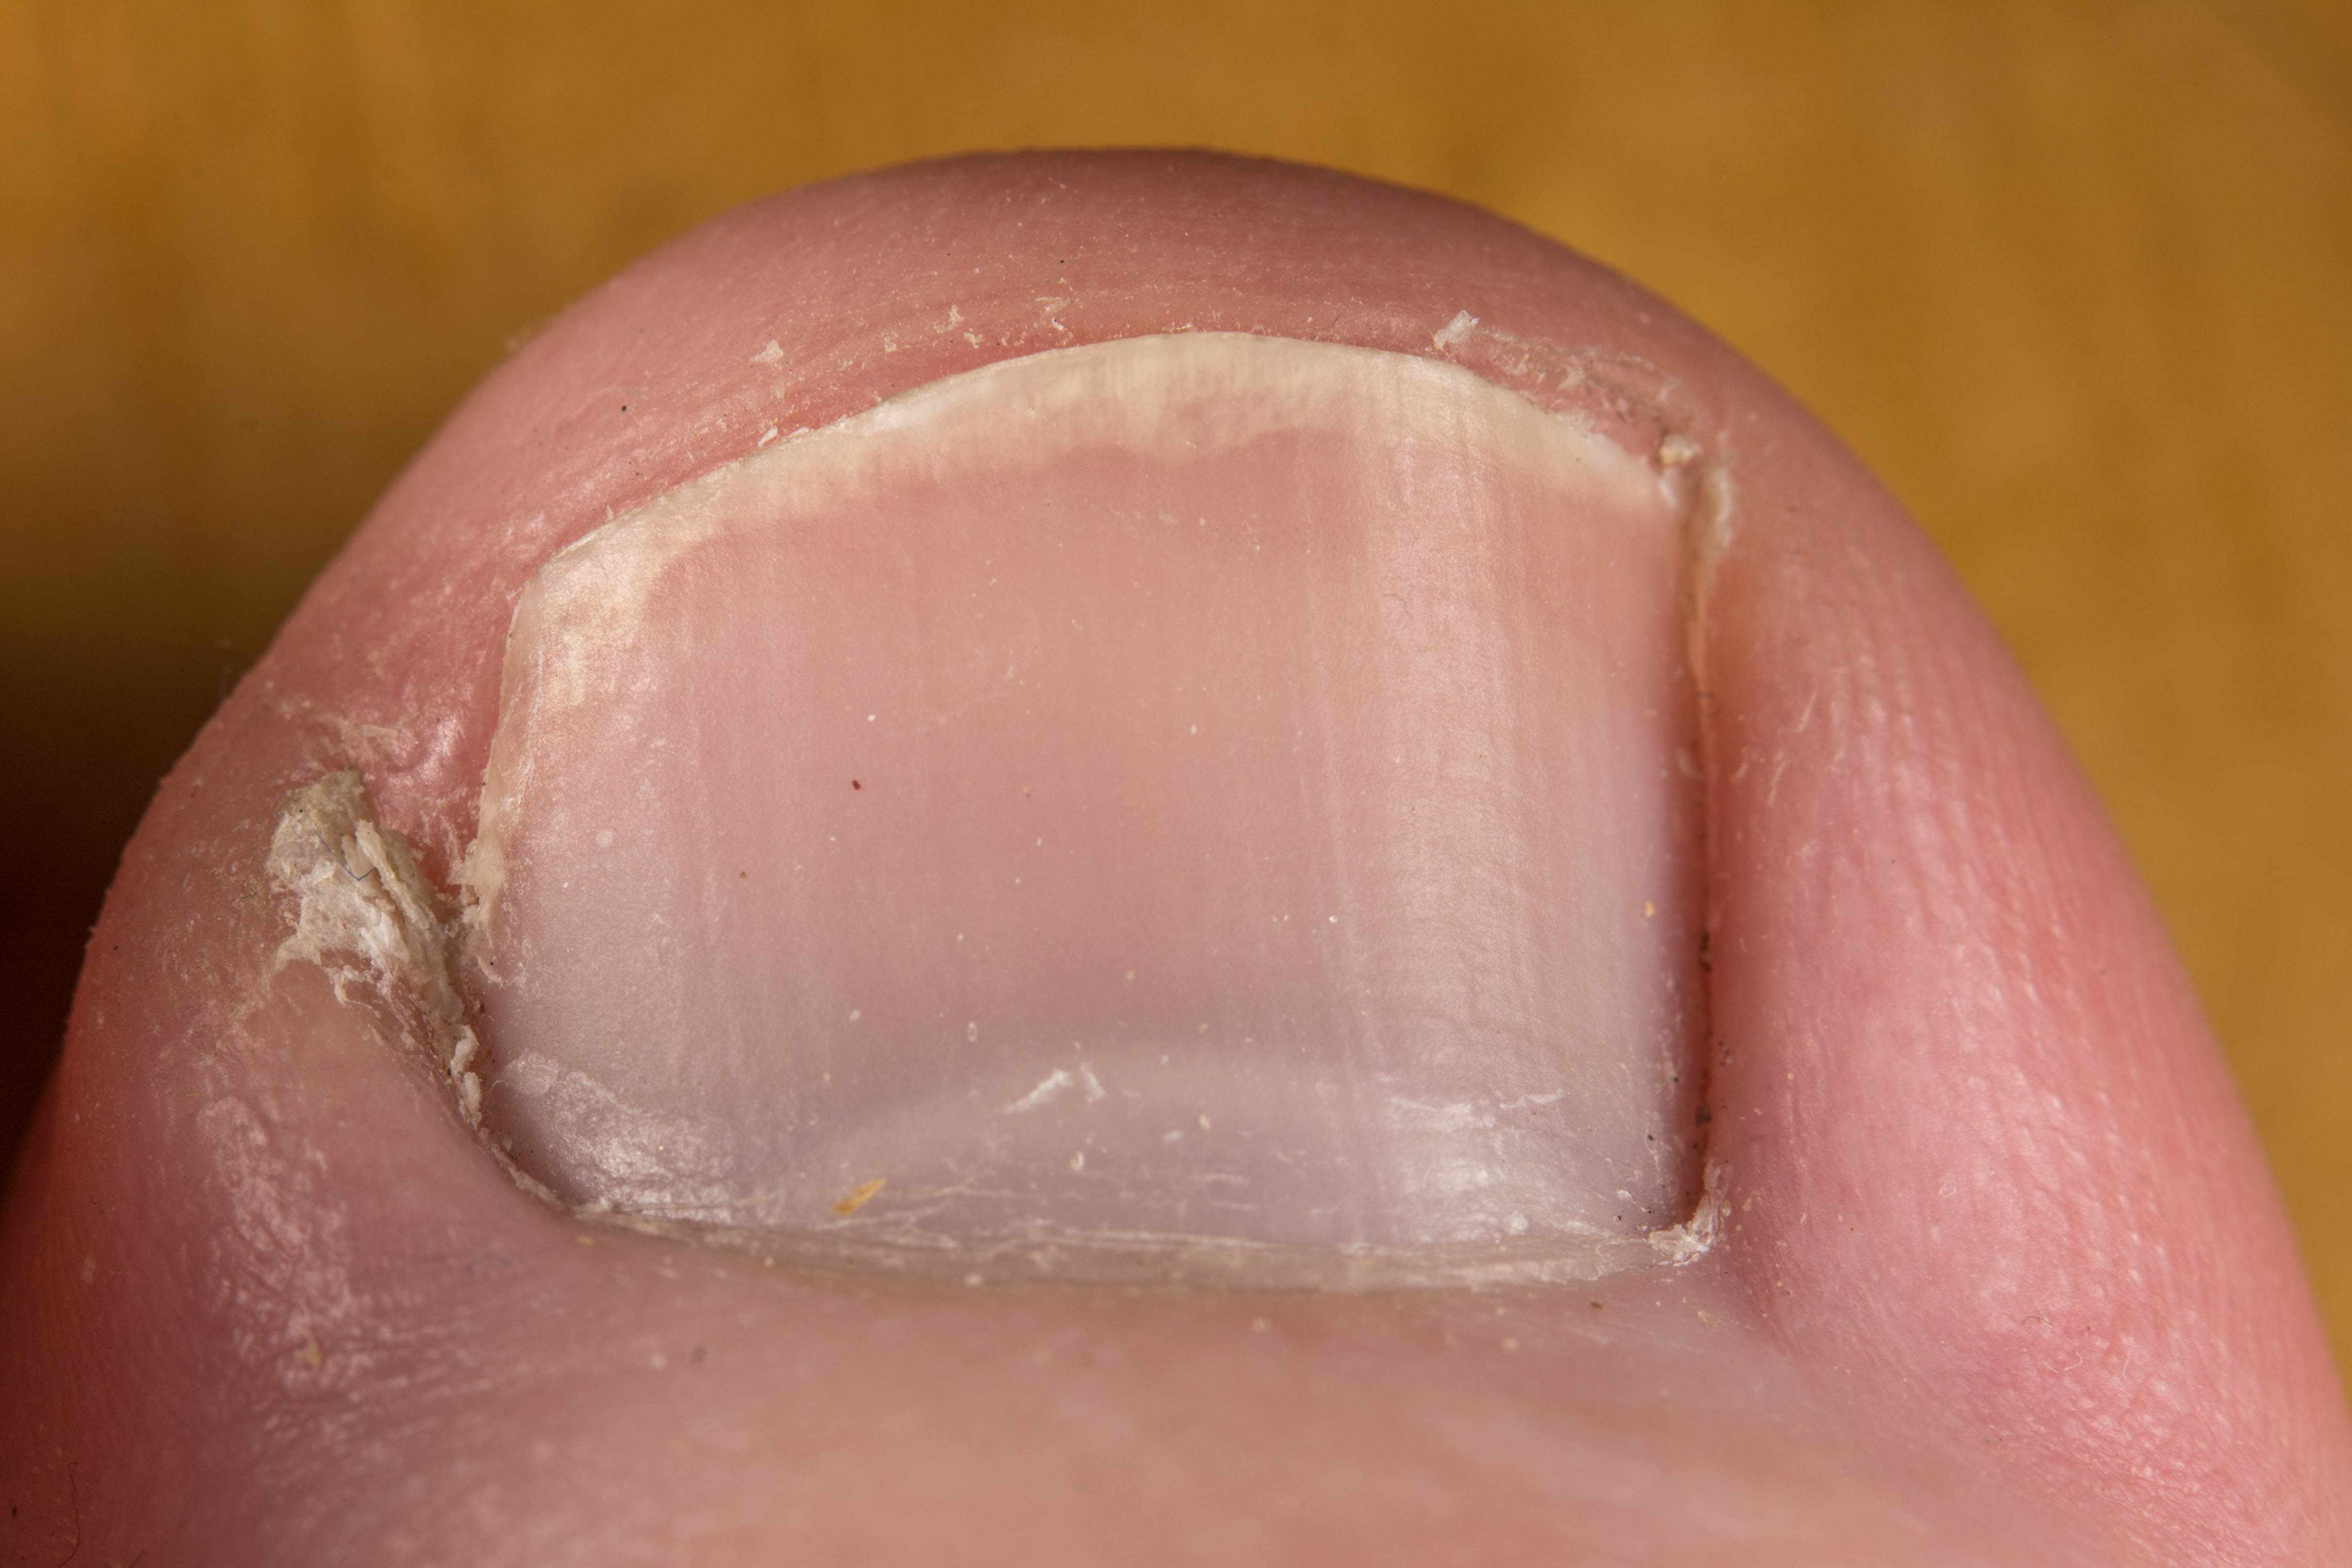 Home Remedies: Complications of ingrown toenails - Mayo Clinic News Network